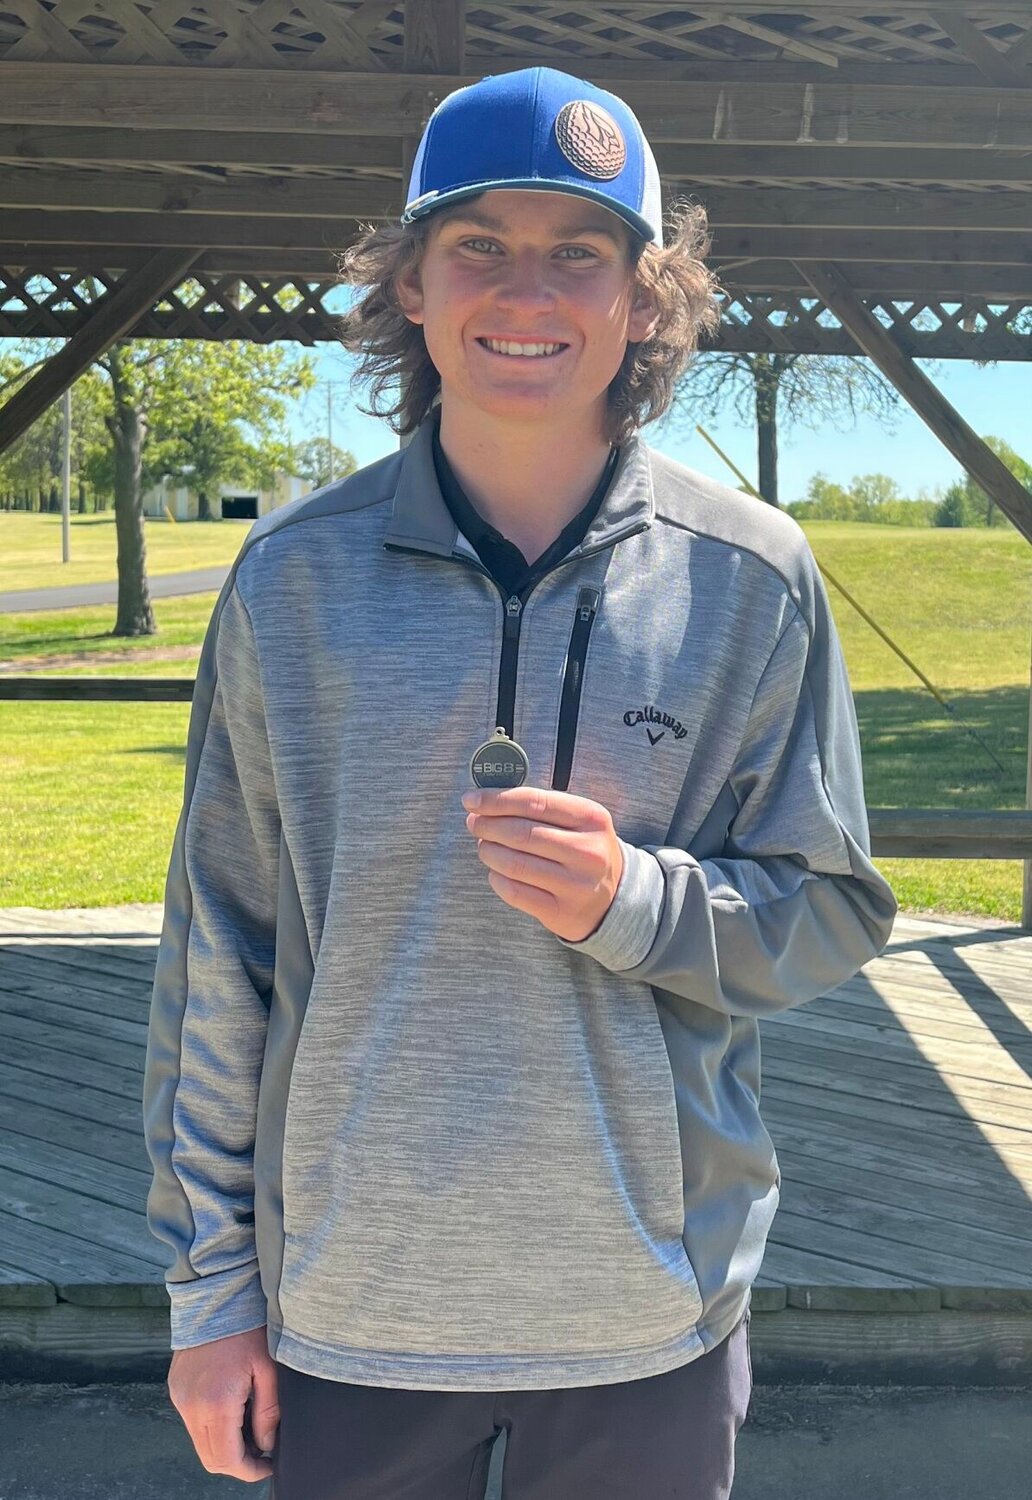 "I was extremely impressed with Michael's overall performance. He continues to improve and mature on the golf course." Tells Reggie Smith, Head Coach for the Marshfield gold team, after Sophomore Michael Alves earned second in the individual championship of the Big 8 Tournament this past weekend.


Contributed Photo by Reggie Smith